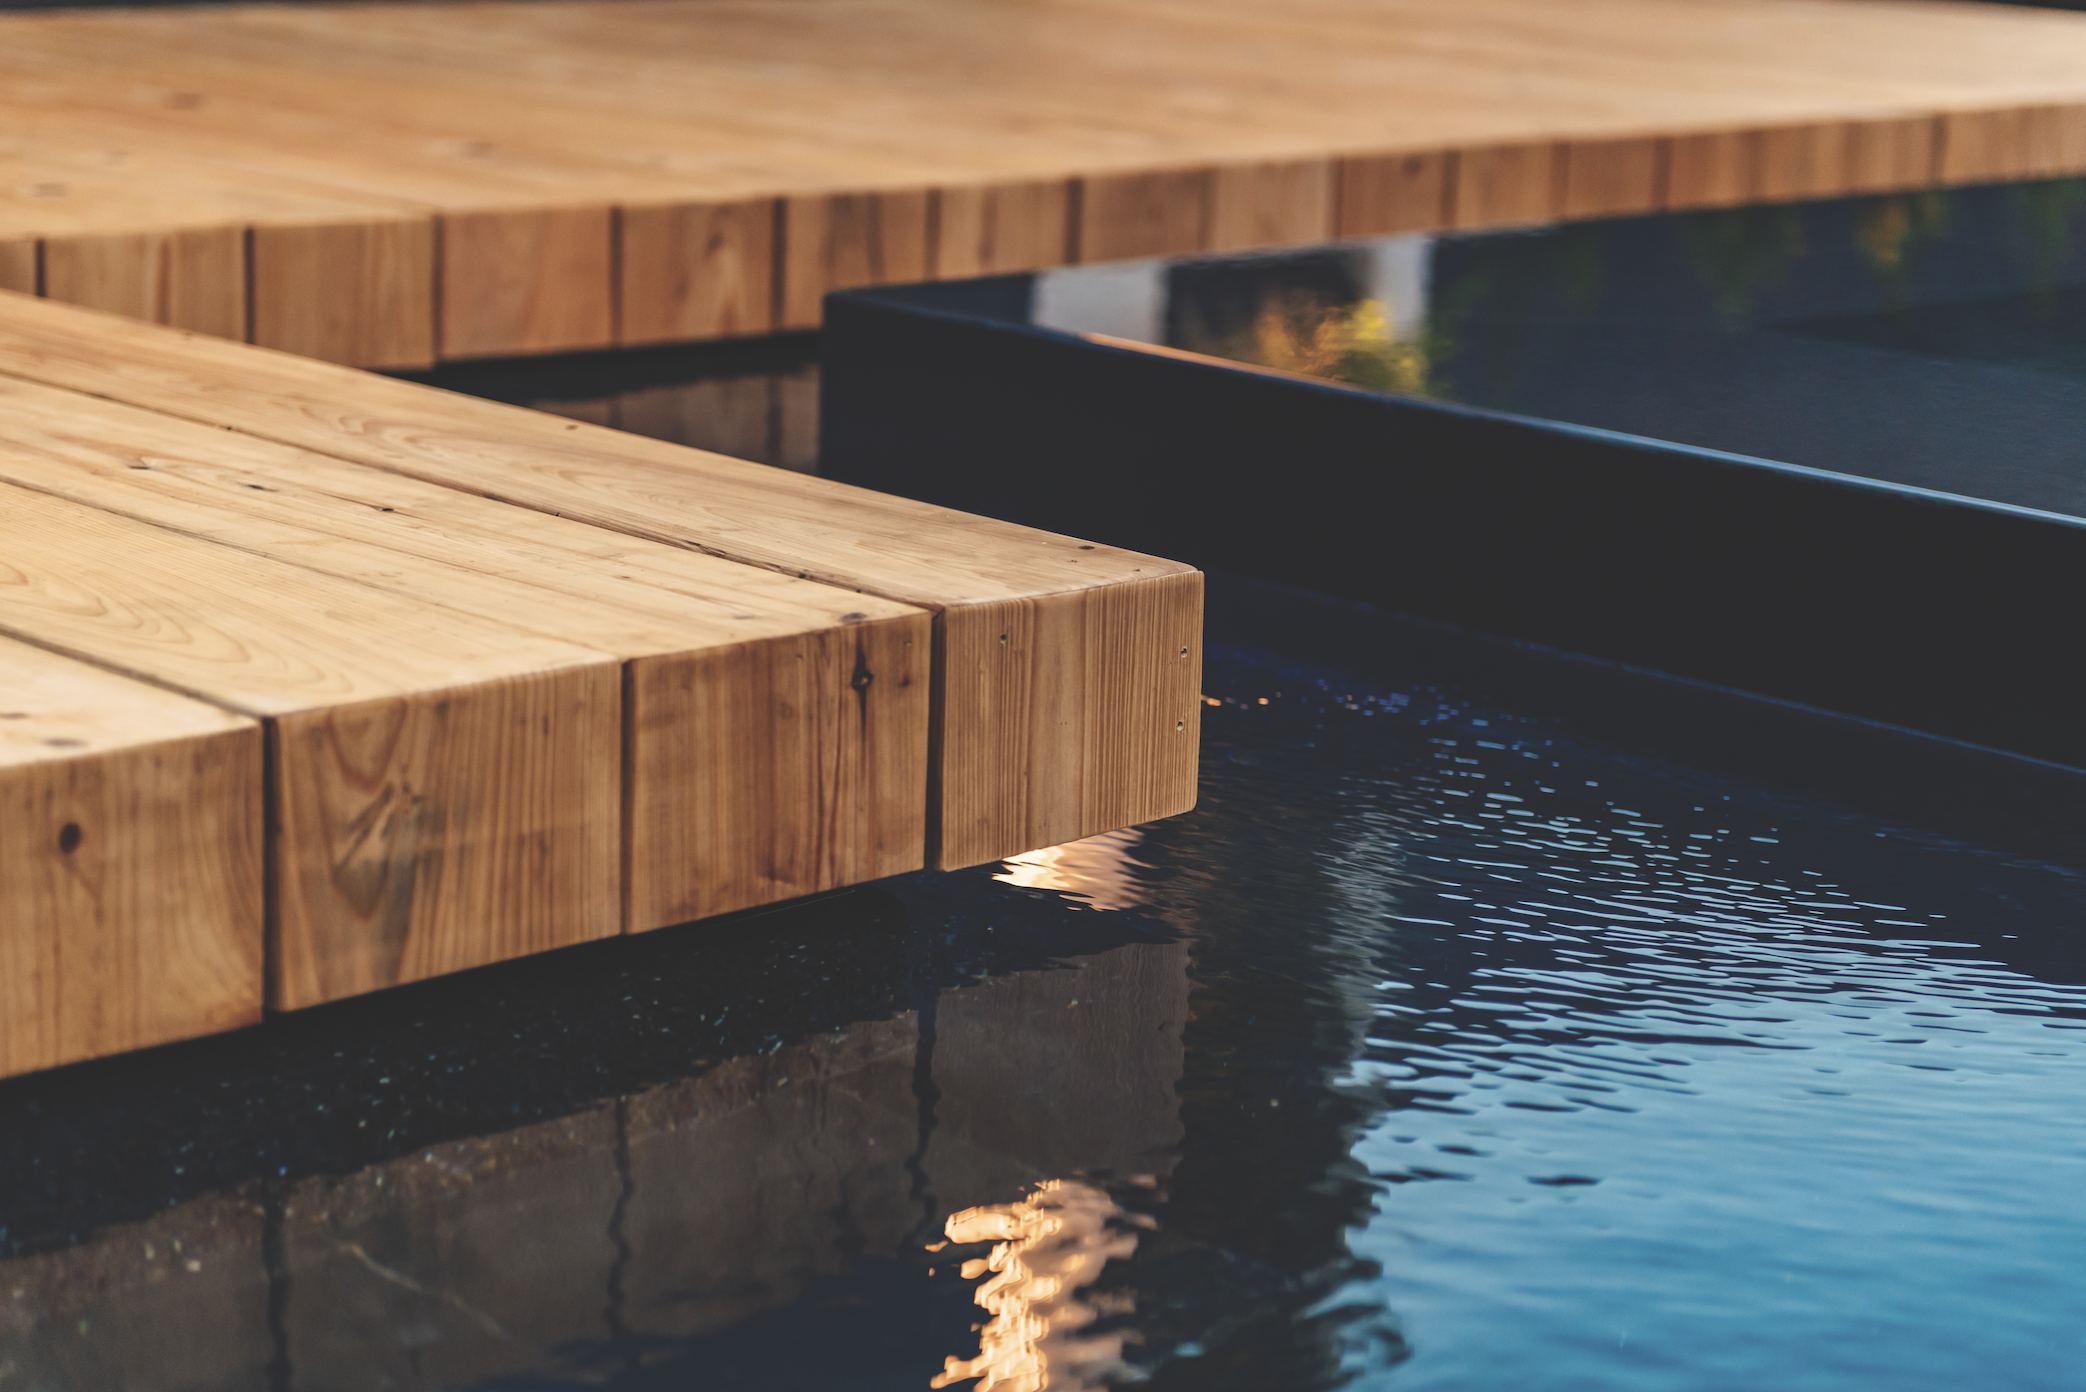 Detail shot of the wood decking and pools edge